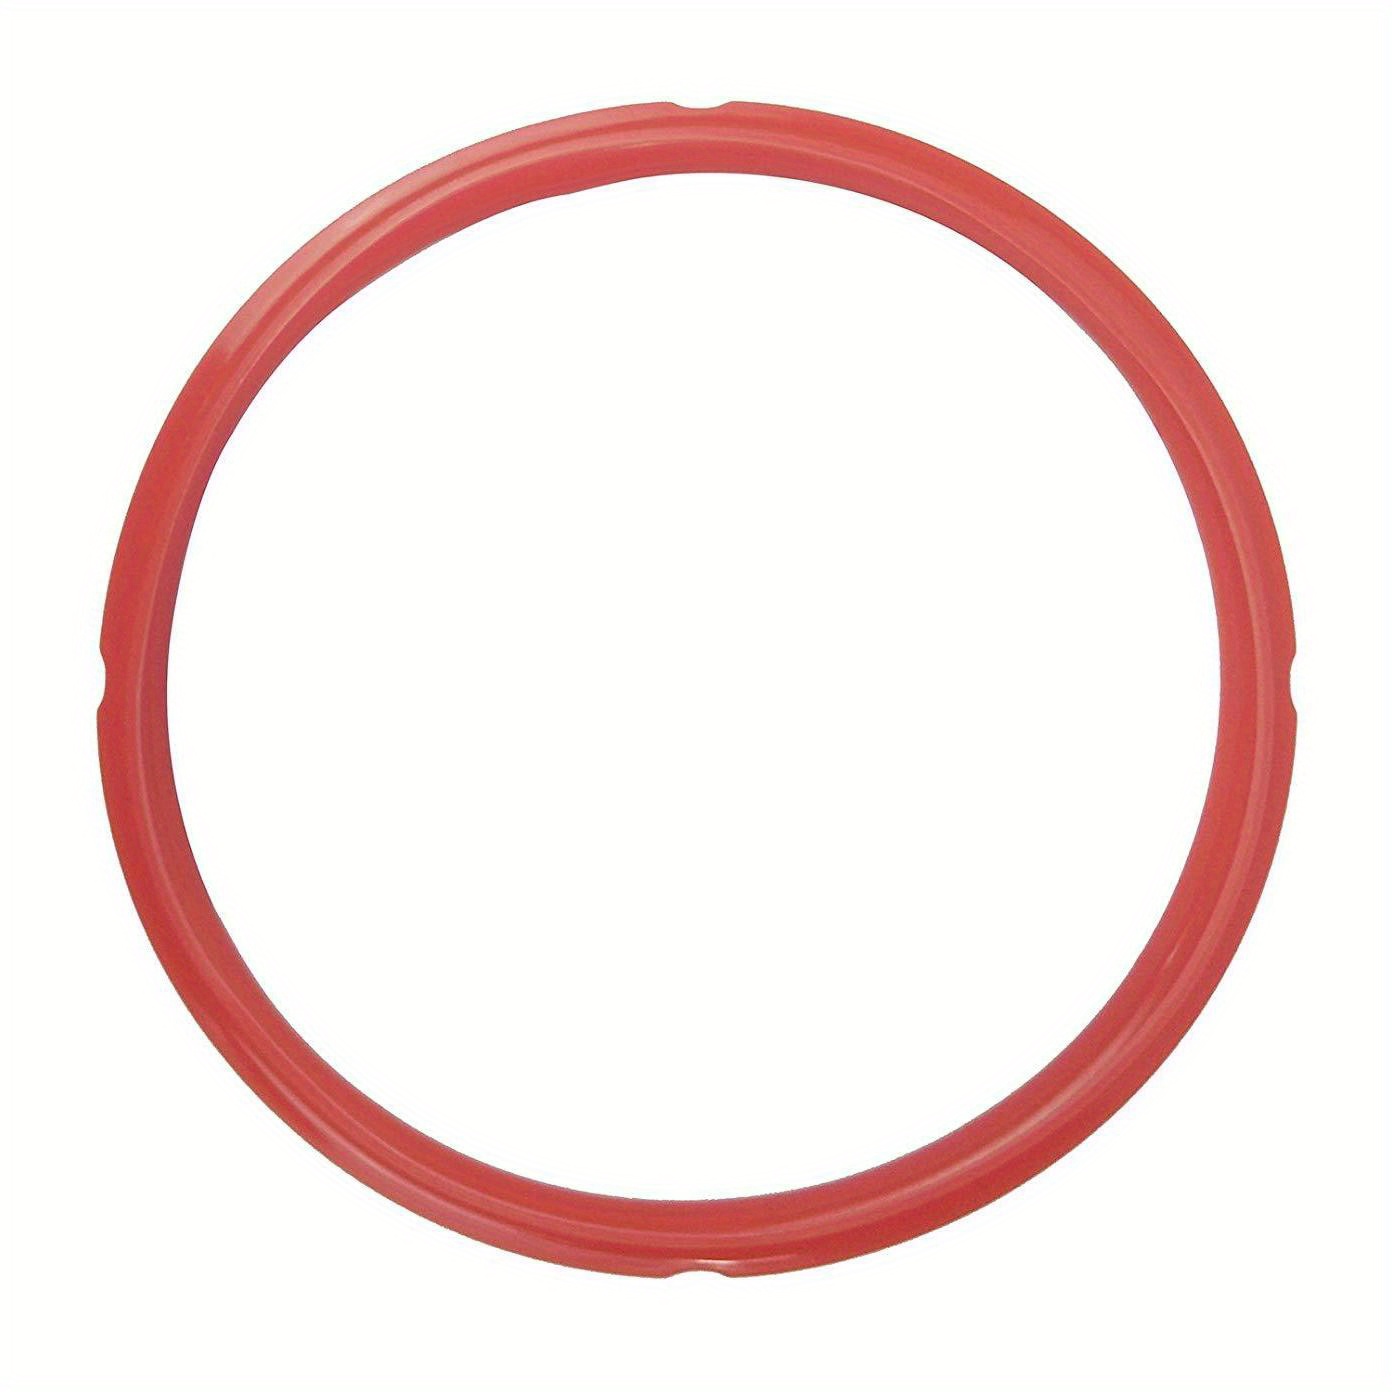 Generic iSH09-M449331mn 6 Quart Instant Pot Sealing Ring - Replacement  Pinch Test 100% Silicone Gasket Seal Rings for 6 Qt Instapot Programmable  Pressu